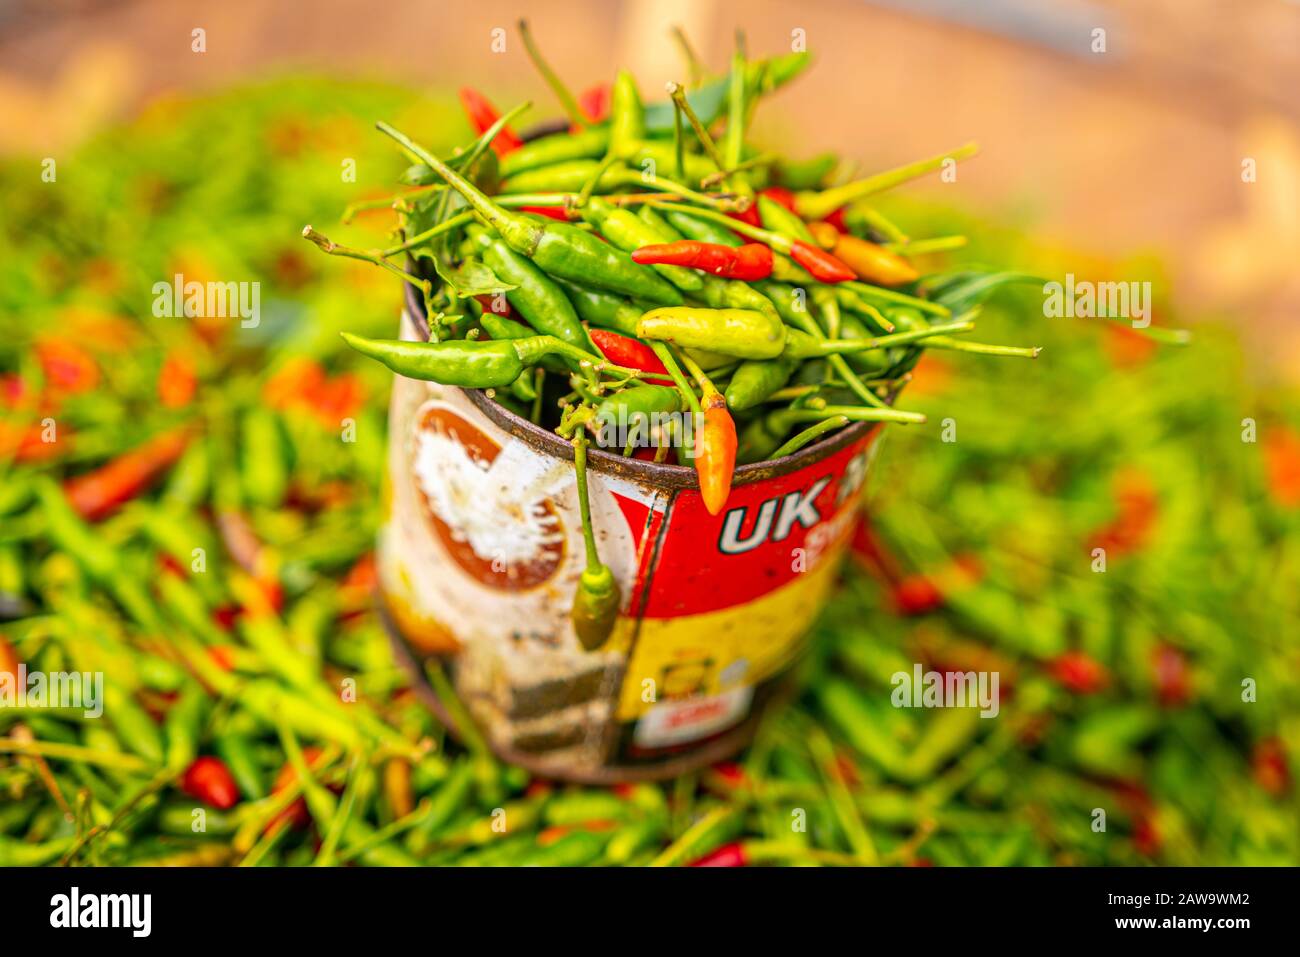 Red and green chili pepper in tin can, local organic market Stock Photo